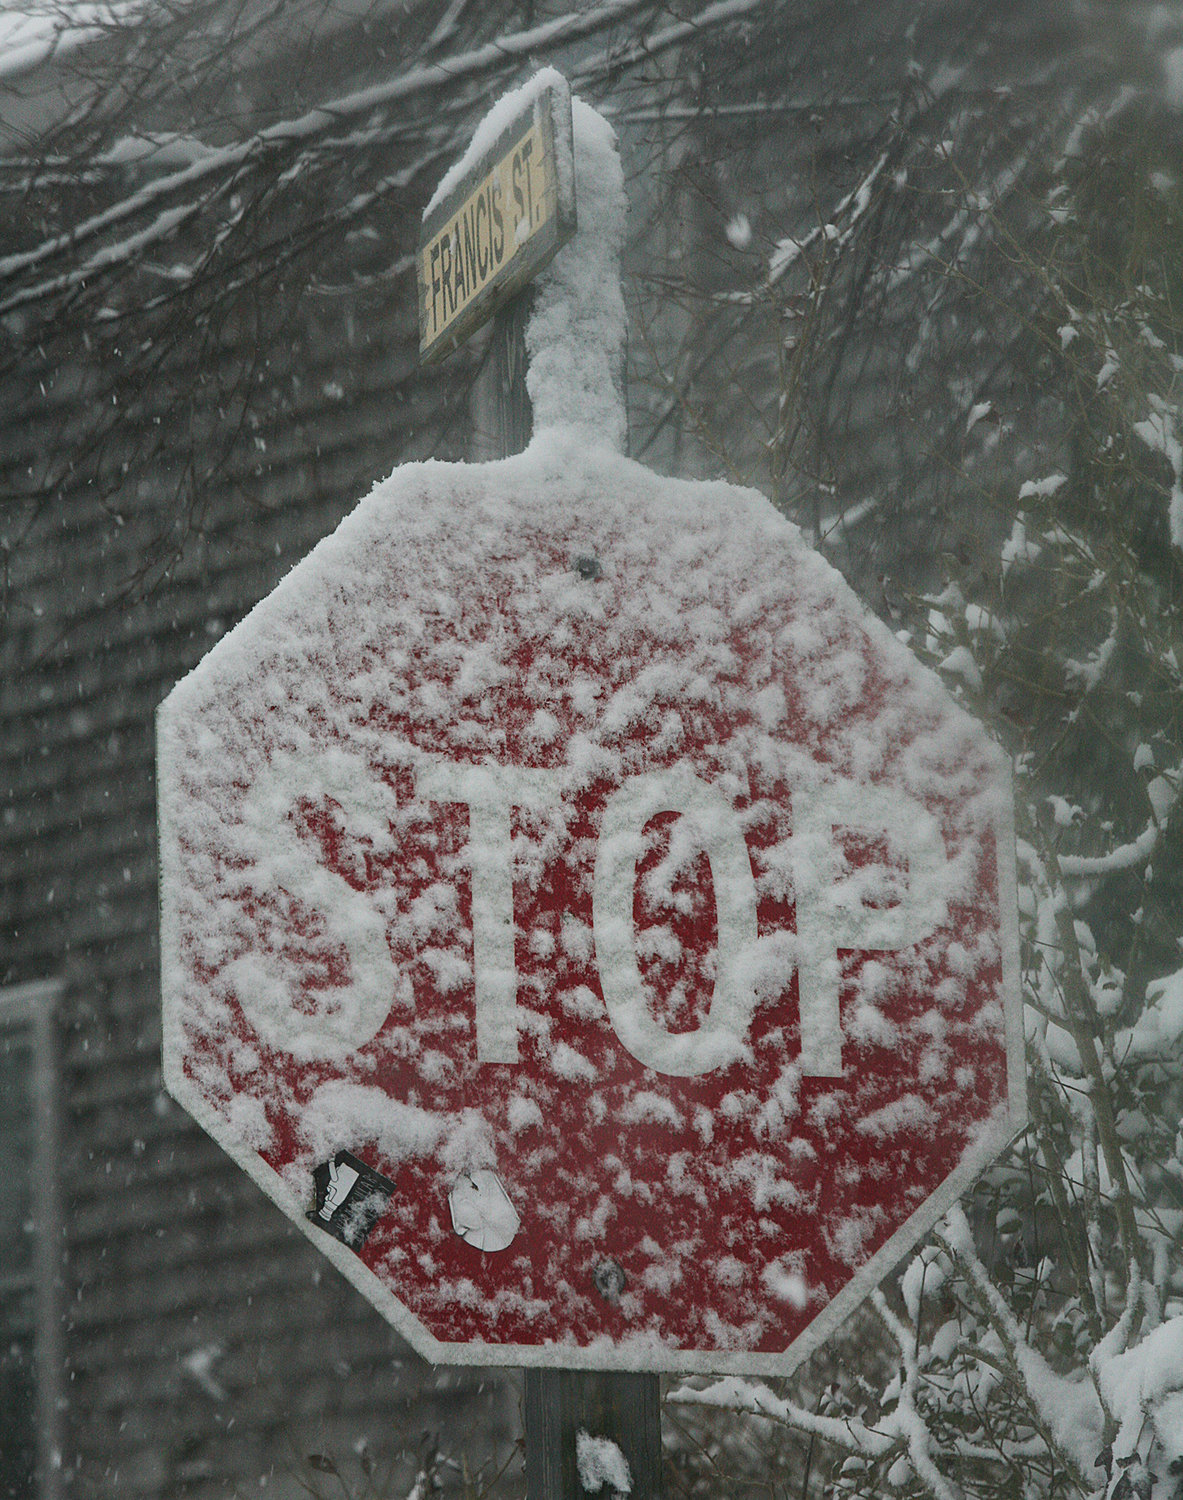 Street signs are snow-covered at the intersection of Francis and Union streets.